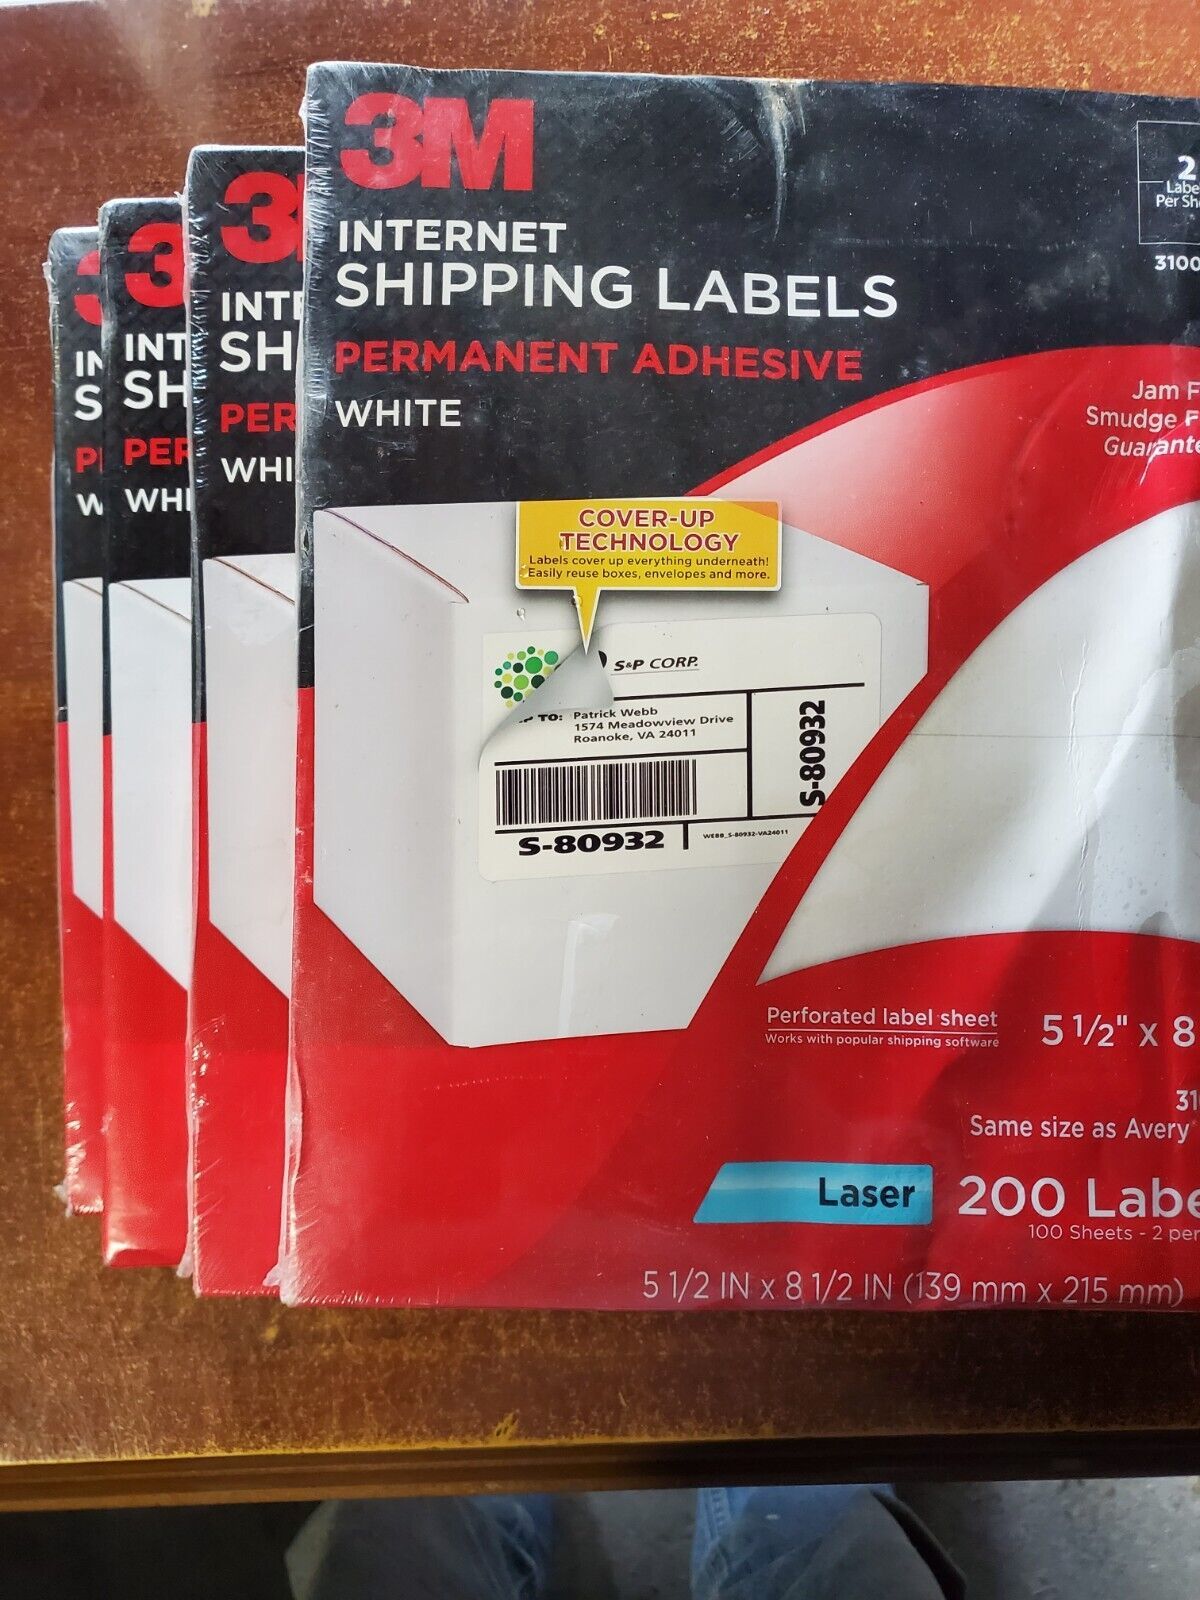 4 Packs 3M Internet Shipping Labels 3100-Z Perforated 5 1/2 X 8 1/2 Avery 5126 - $30.84